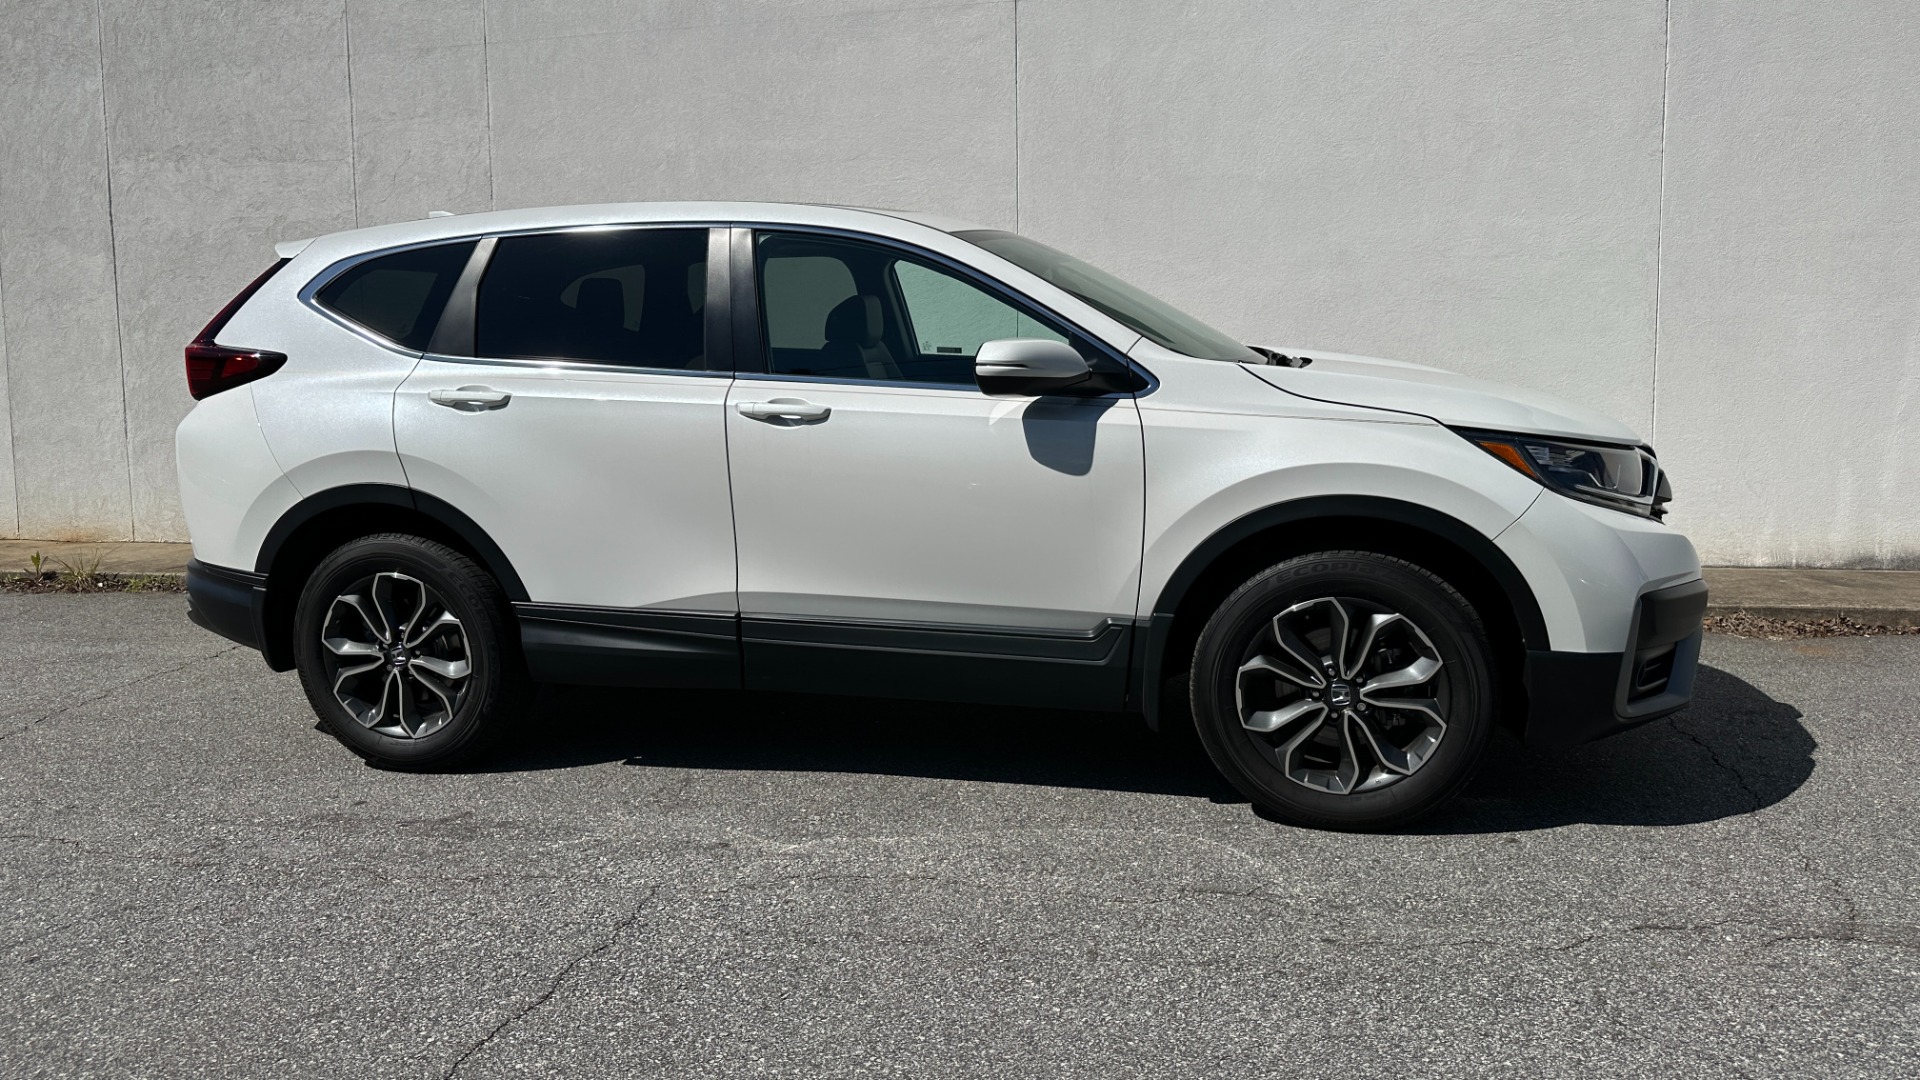 Used 2021 Honda CR-V EX-L / LEATHER / SAFETY ASSIST / PEARL PAINT for sale $31,695 at Formula Imports in Charlotte NC 28227 3